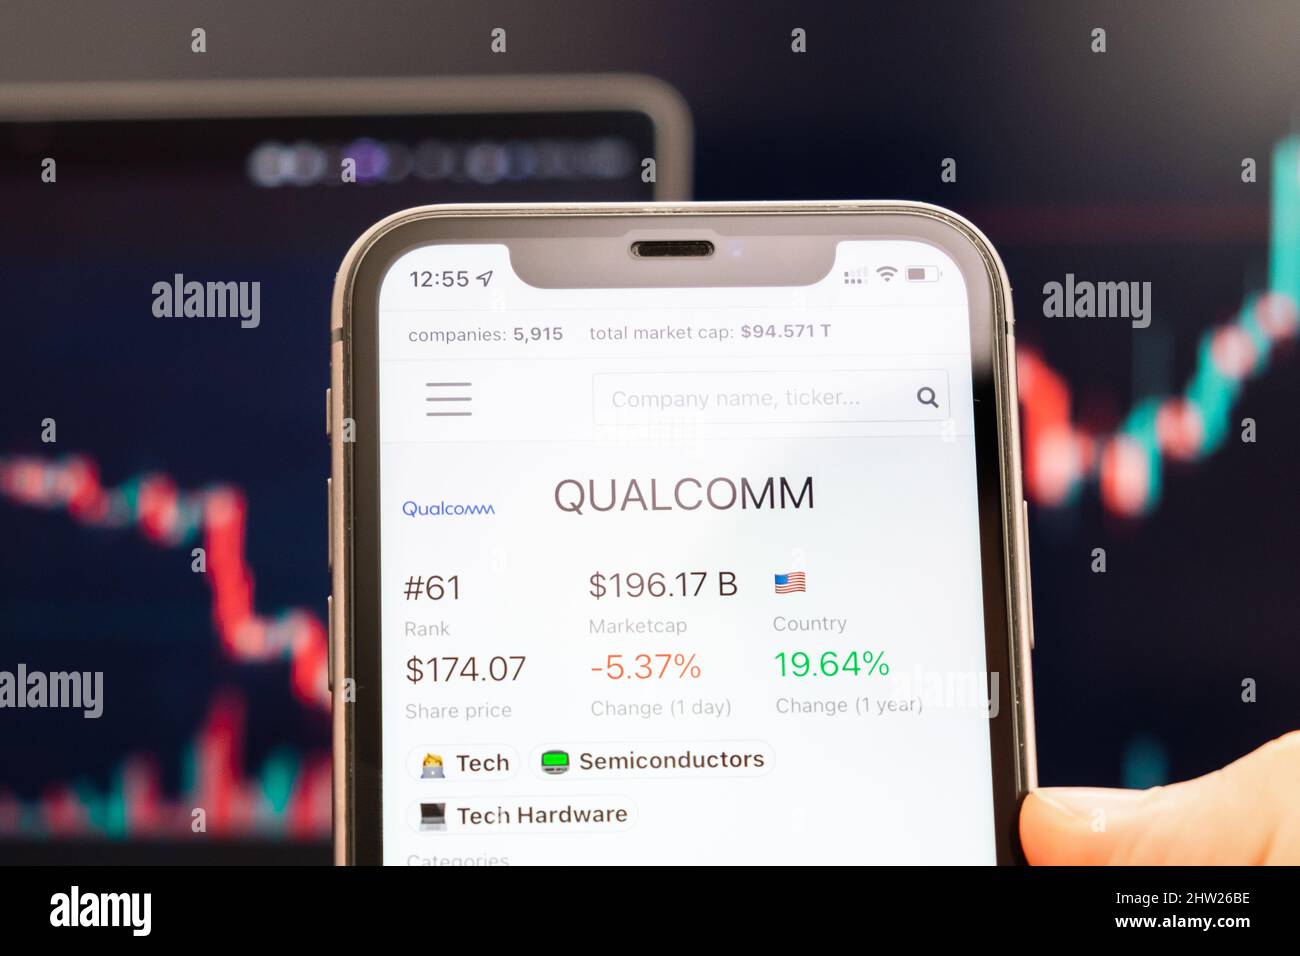 QUALCOMM stock price on the screen of mobile phone in mans hand with changing stock market graphs on the background, February 2022, San Francisco, USA. Foto Stock